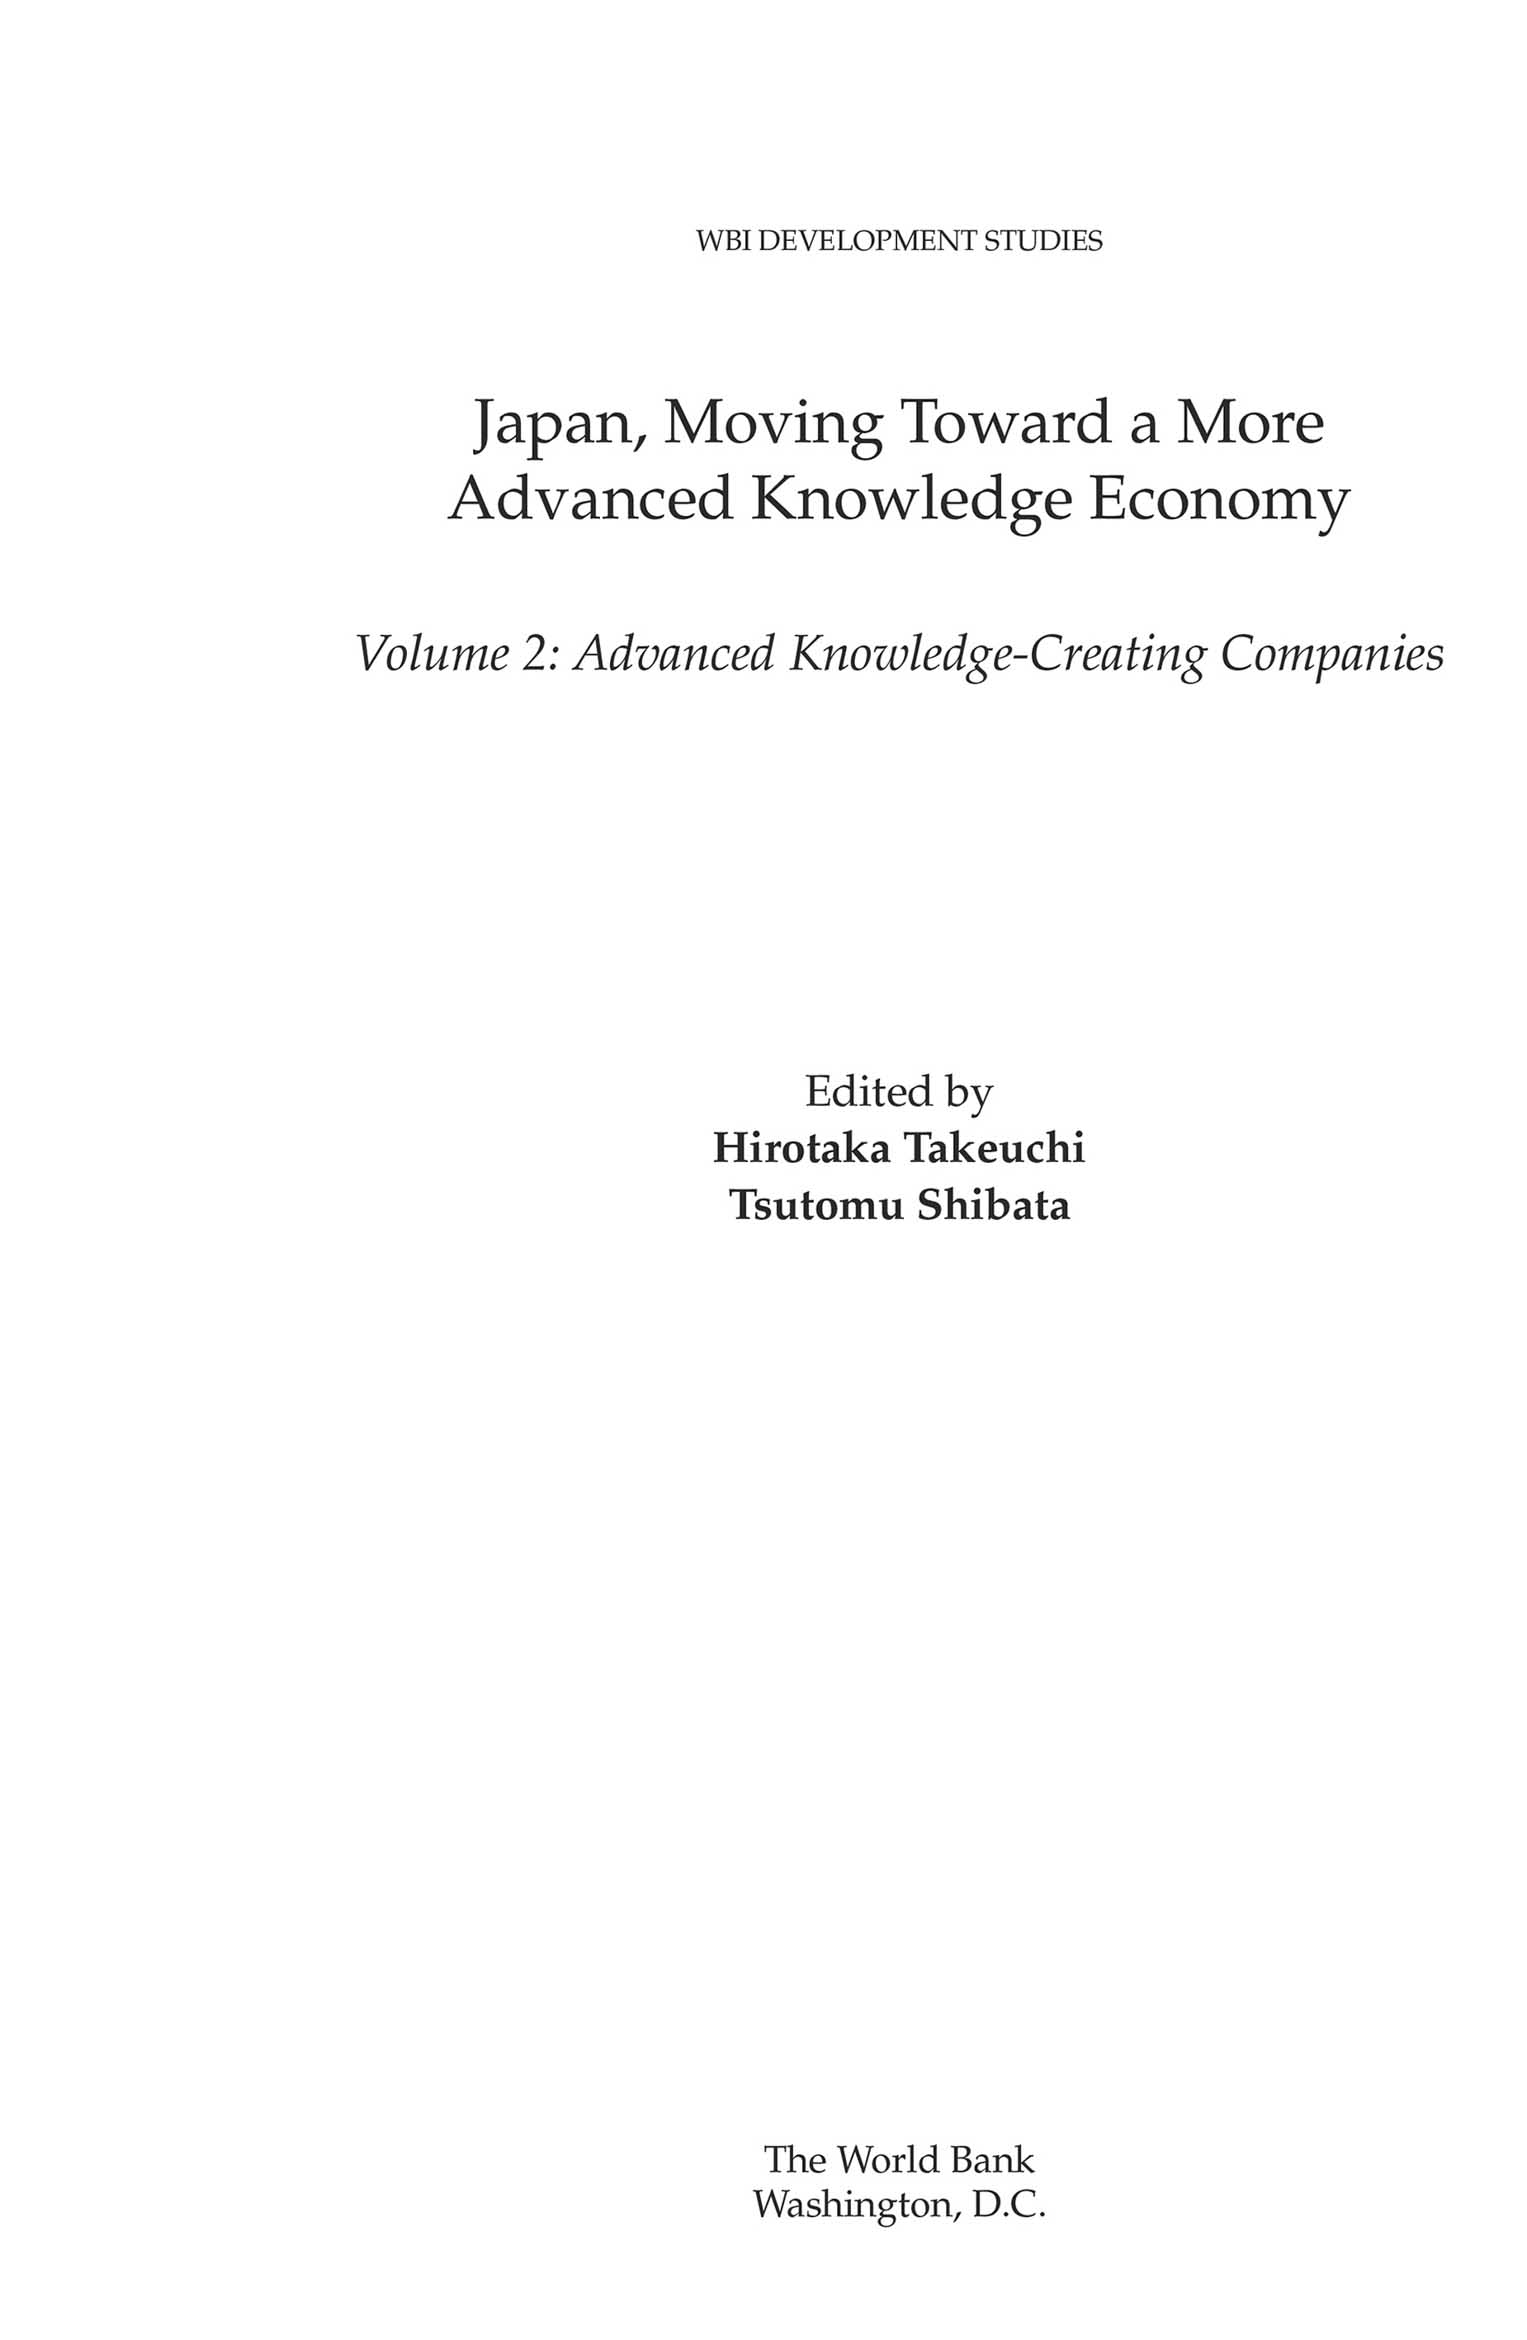 Japan - Moving Towards a More Advanced Knowledge Economy scan 2 main image